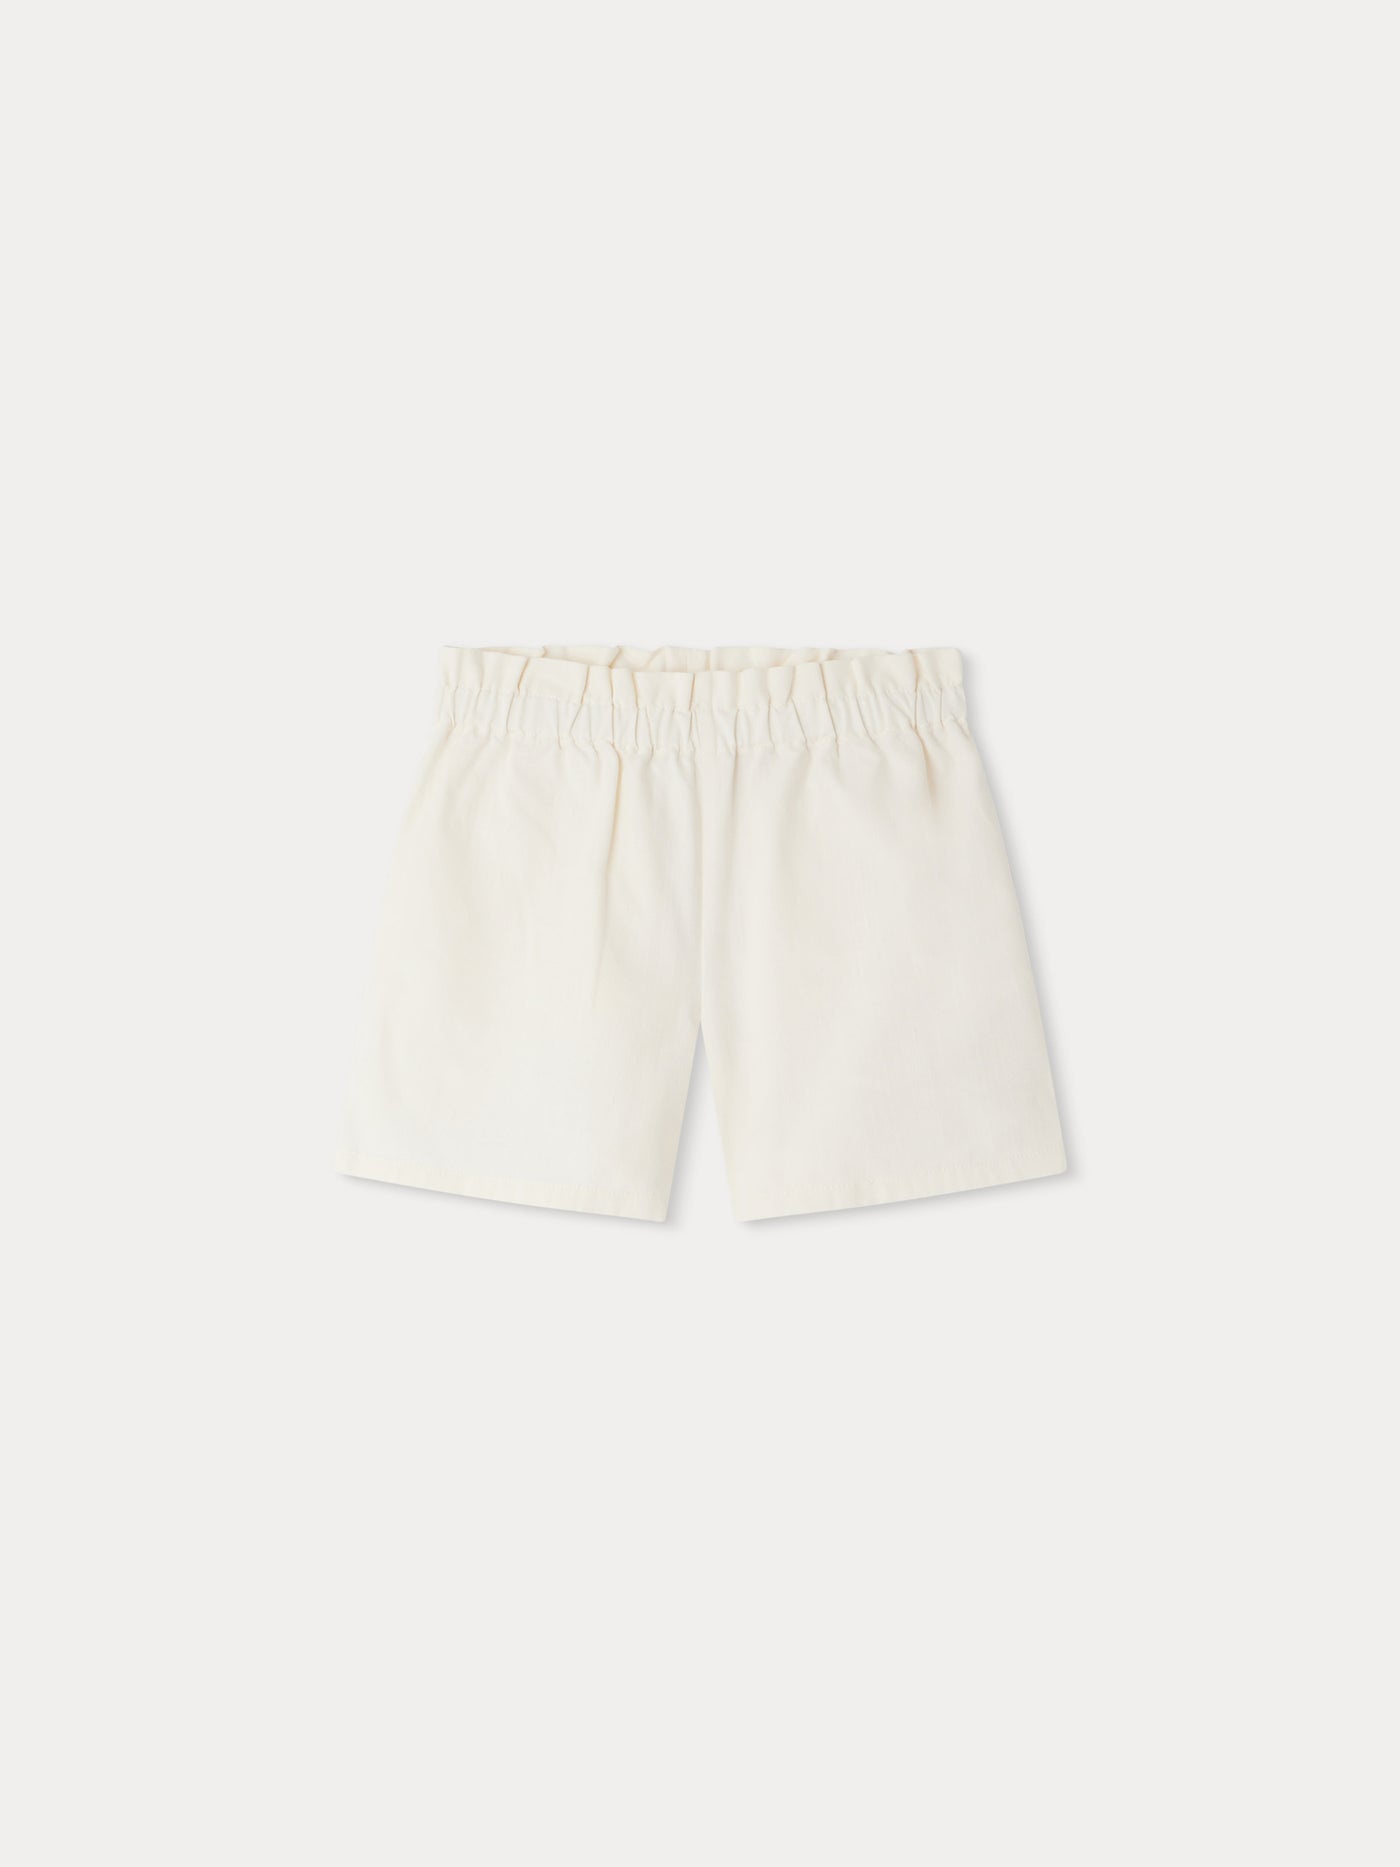 Linen Bloomers Laced for Woman/ Linen Natural Shorts Women's